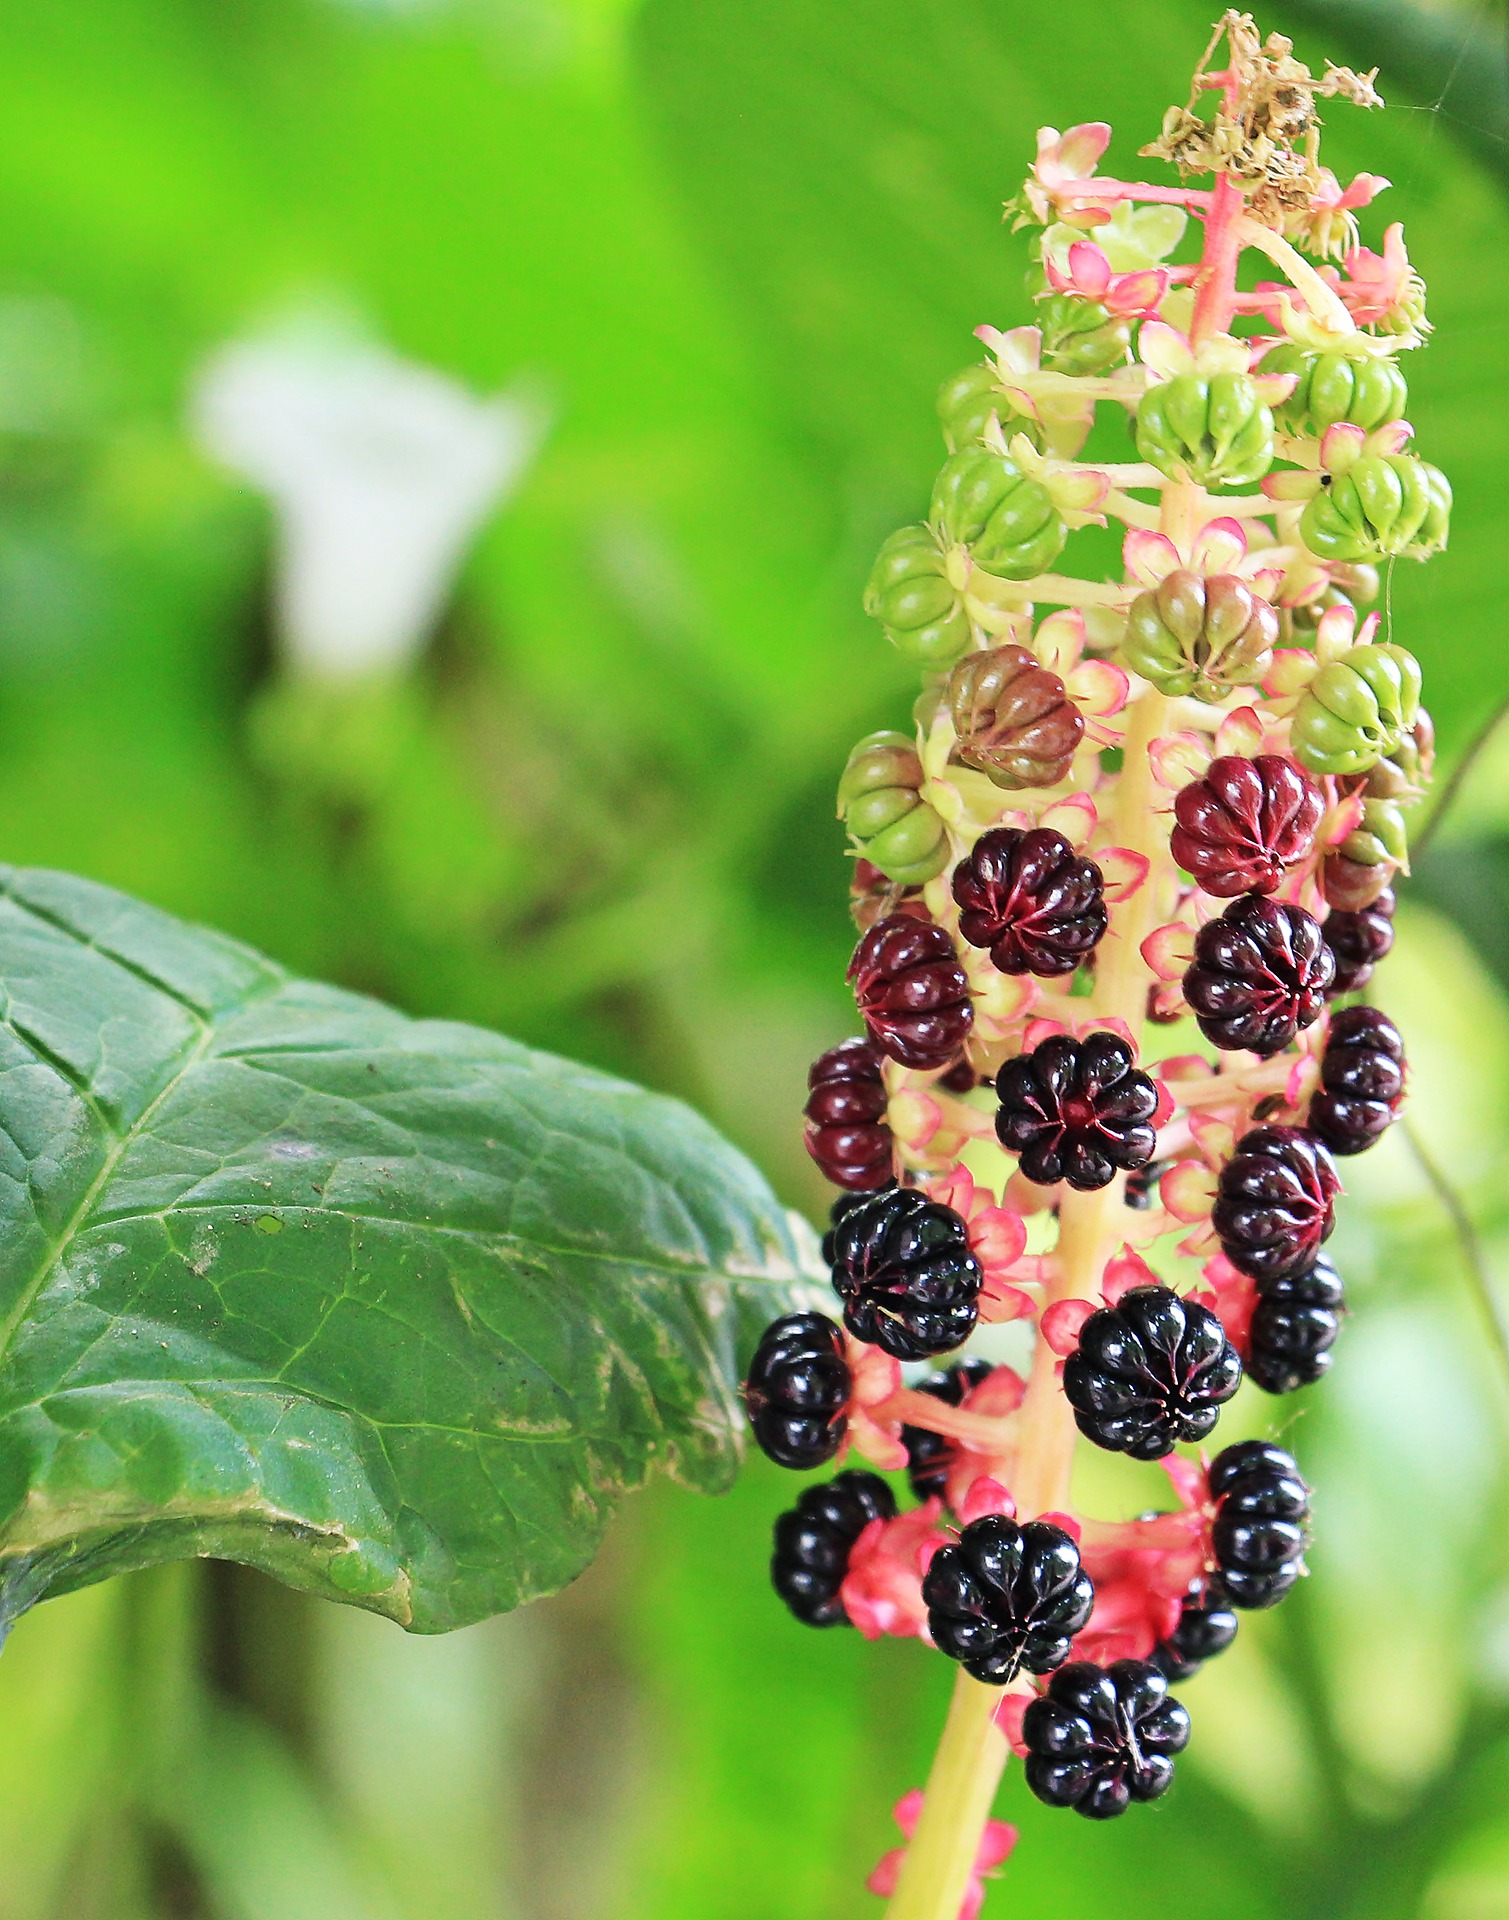 Pokeweed in the garden photo